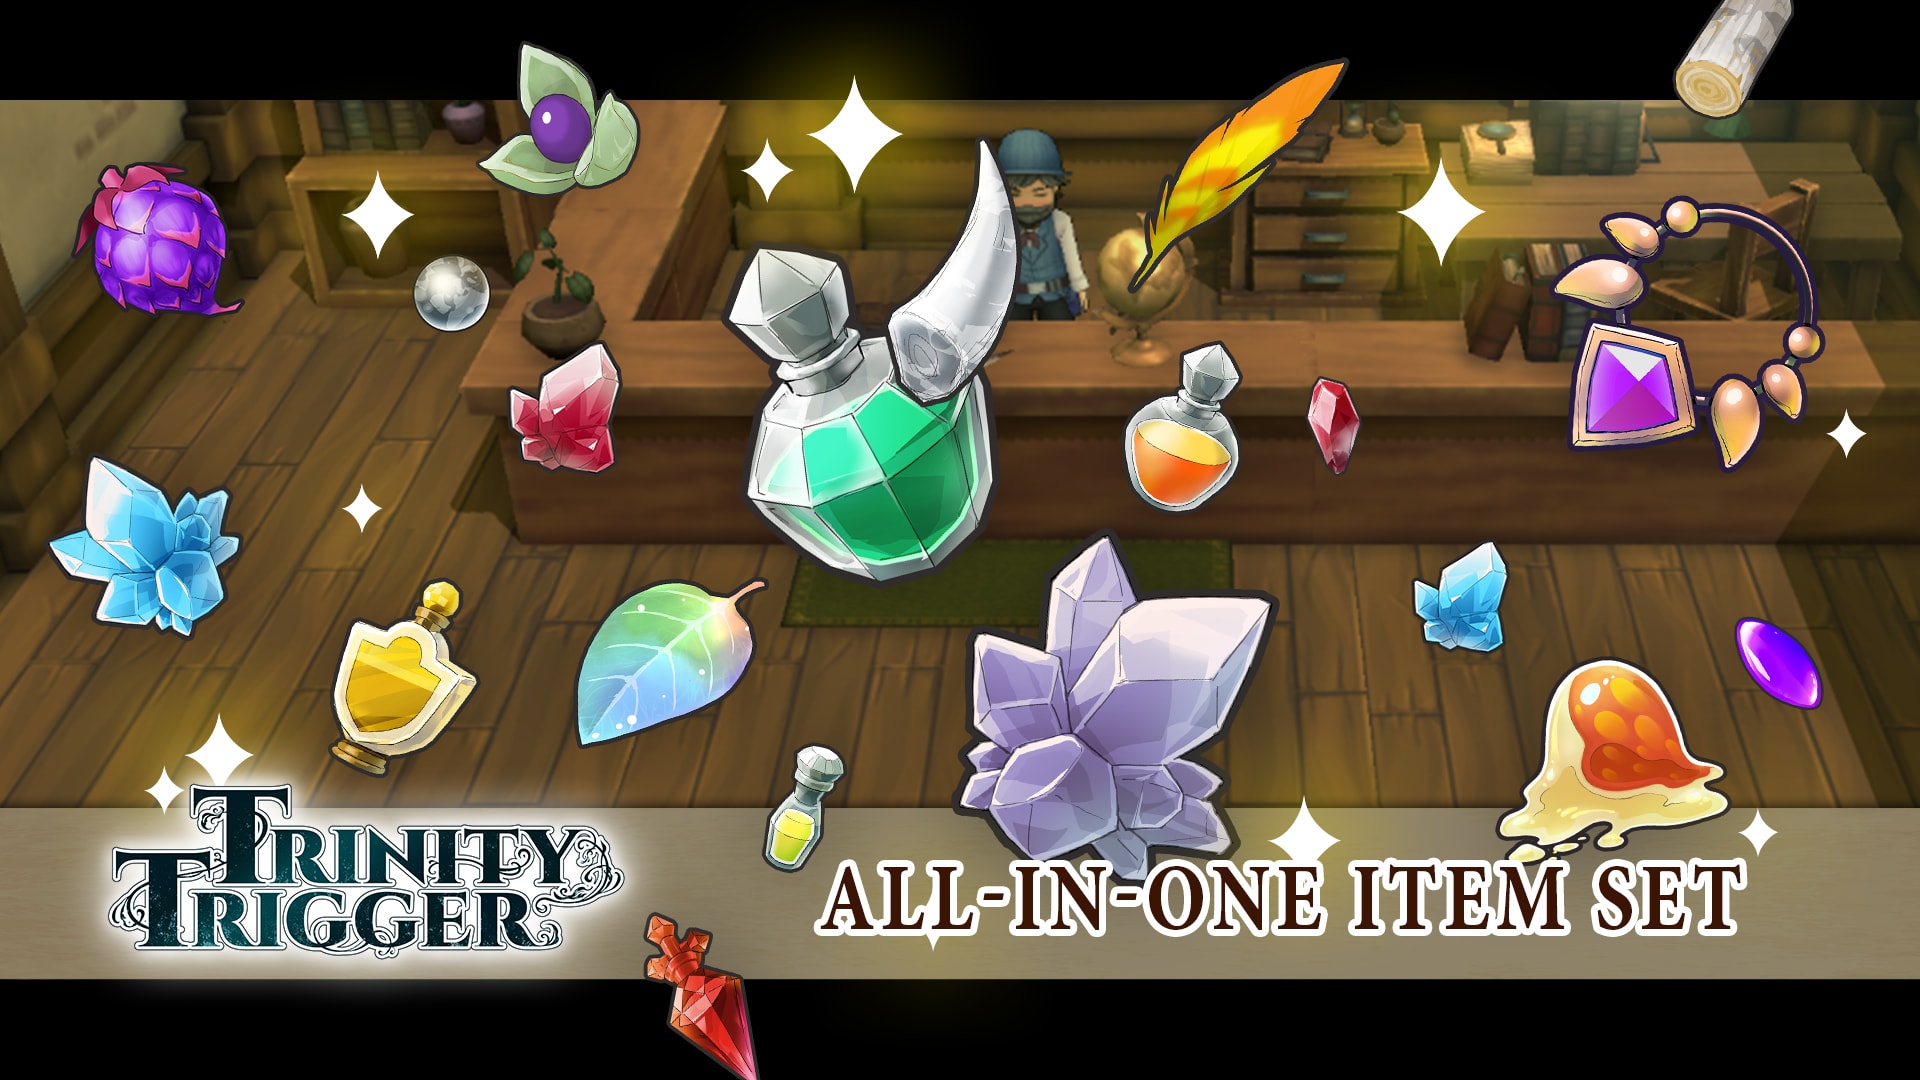 All-in-One Item Set